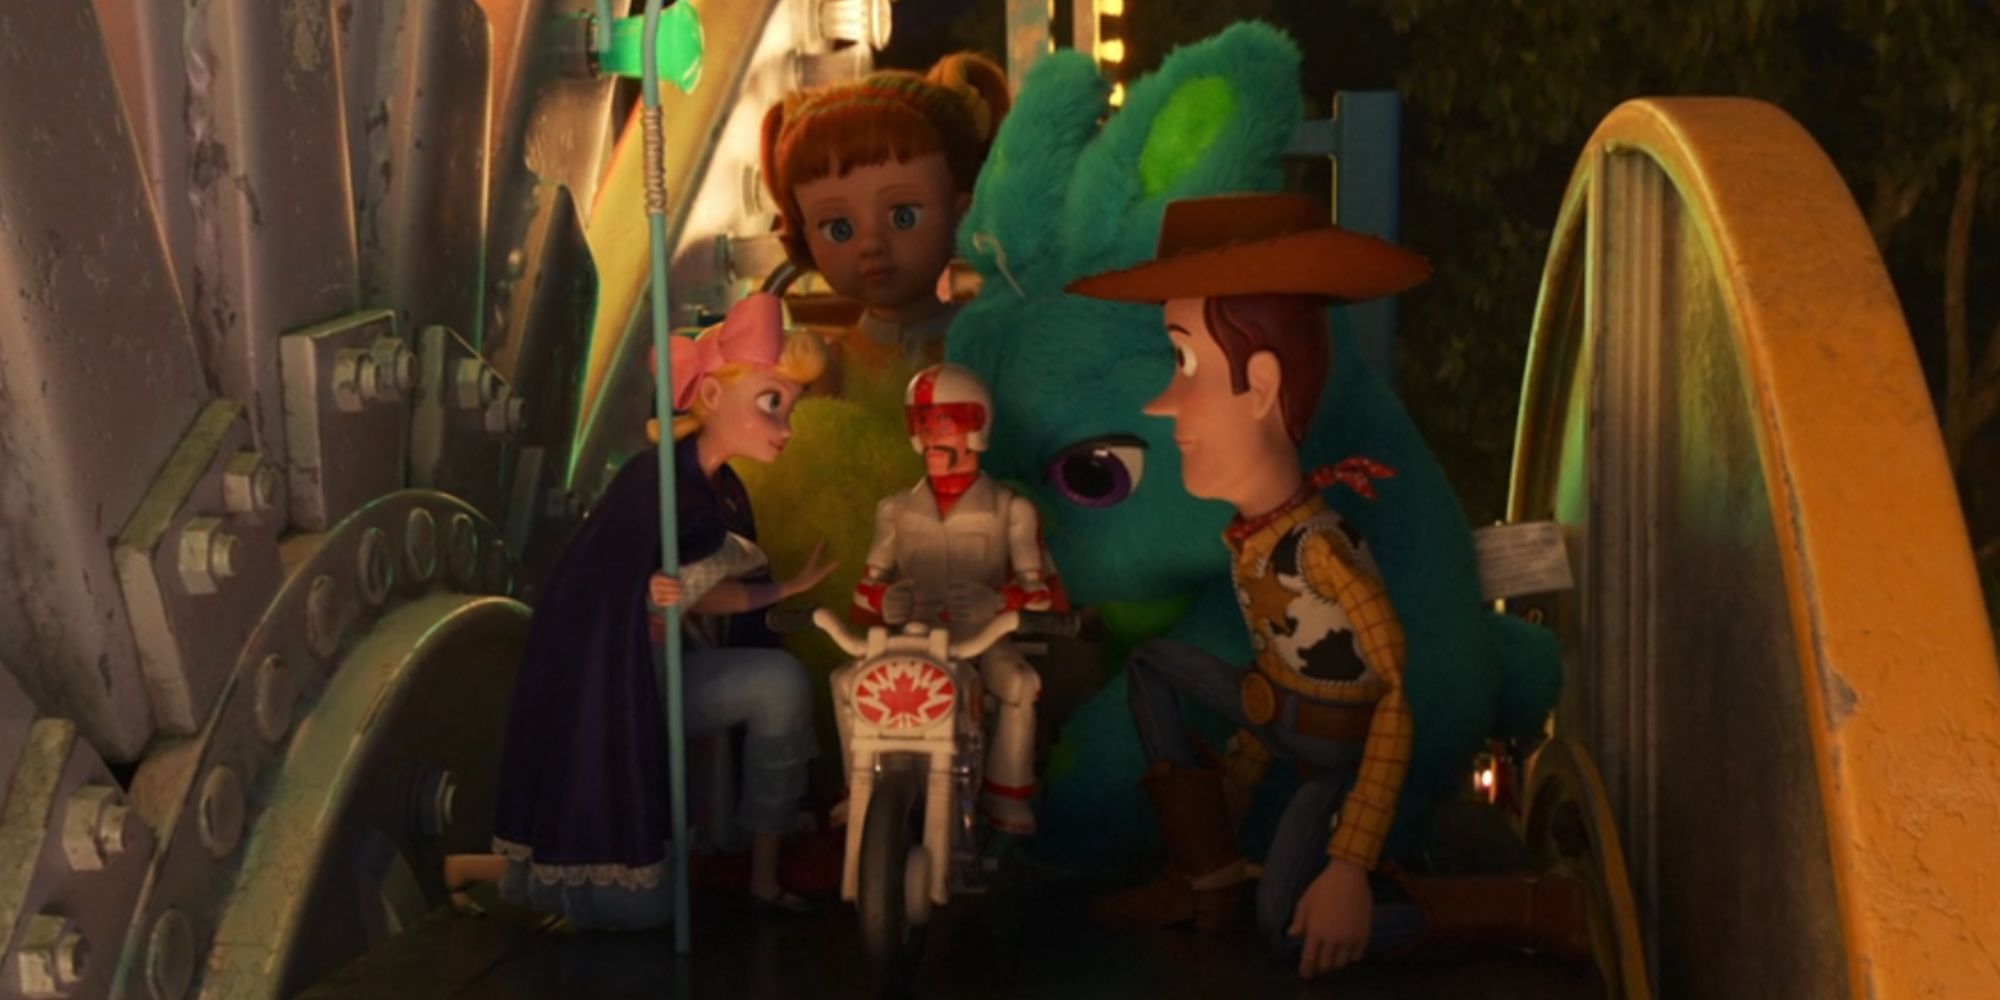 Woody and the other Lost Toys in Toy Story 4